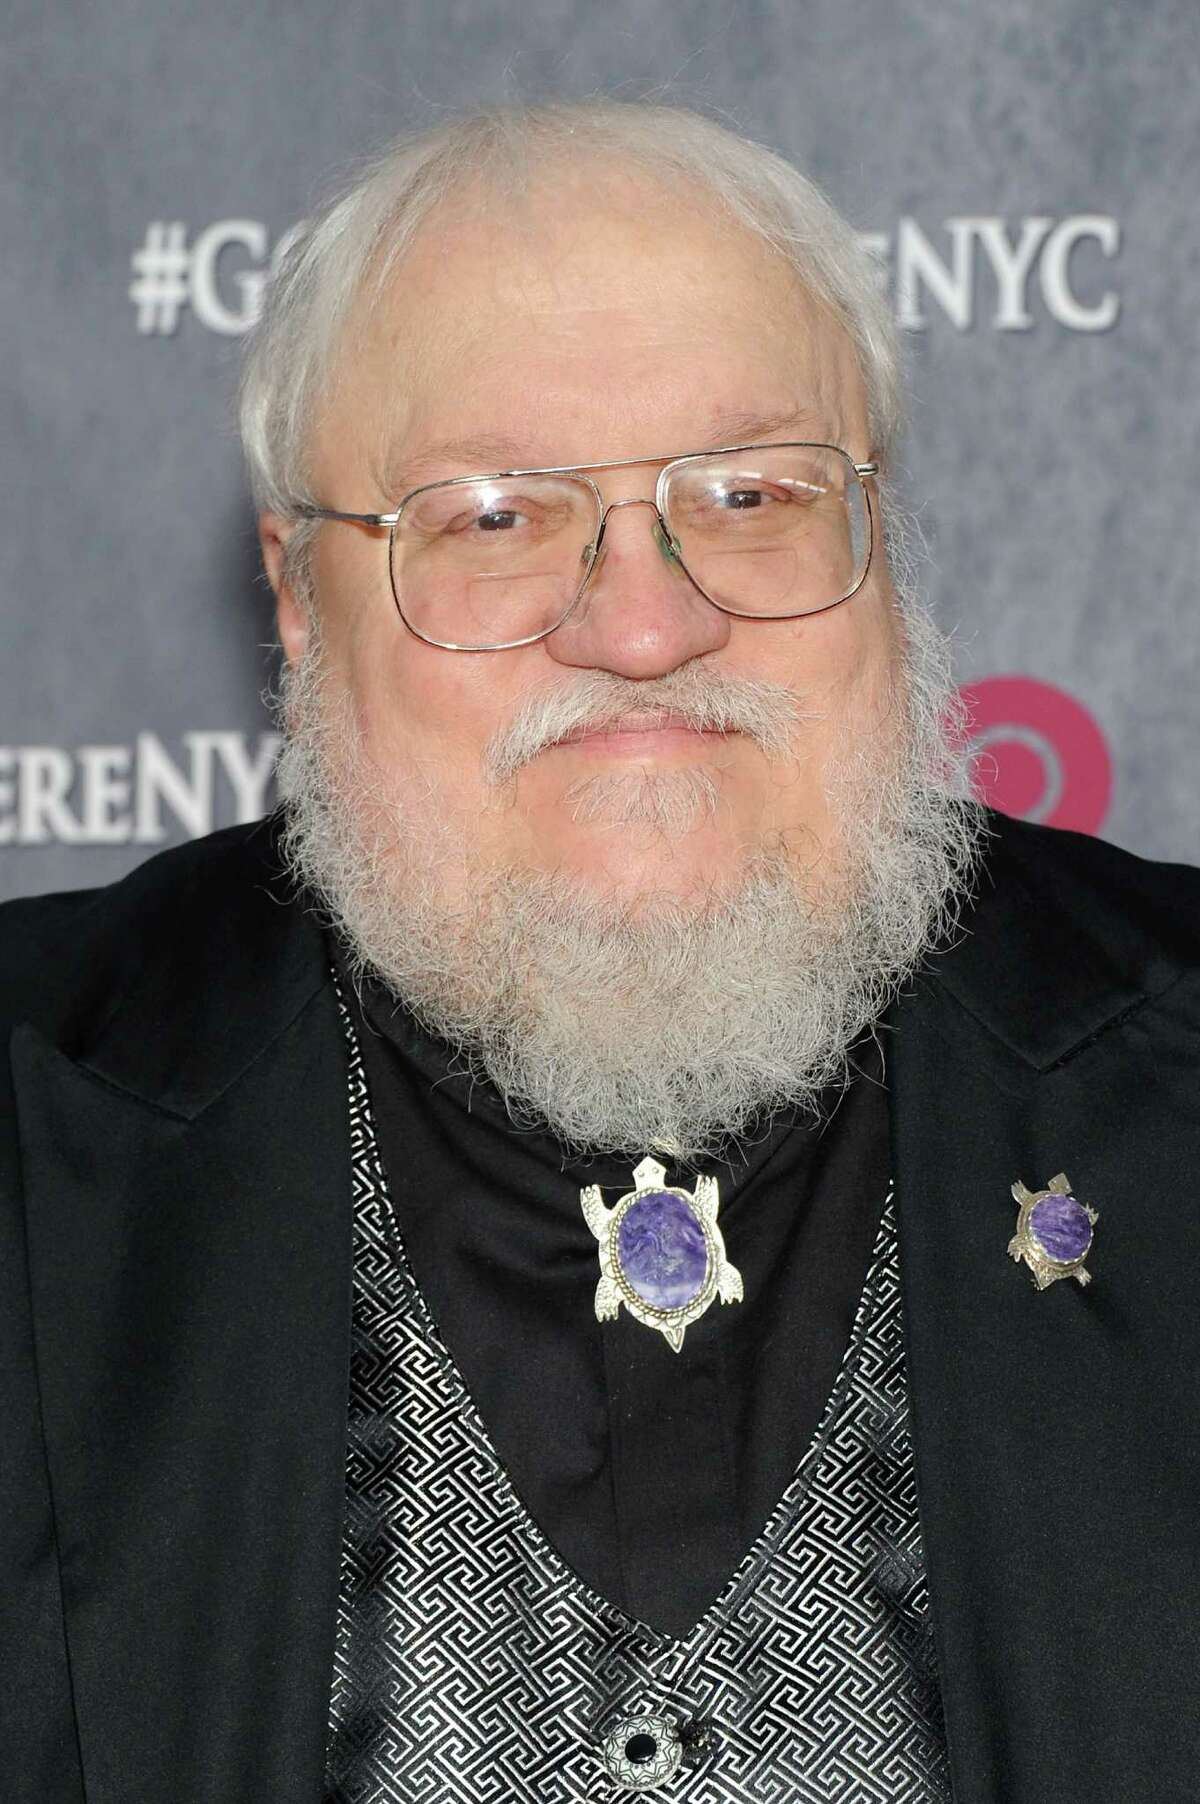 NEW YORK, NY - MARCH 18: Author George R.R. Martin attends the "Game Of Thrones" Season 4 New York premiere at Avery Fisher Hall, Lincoln Center on March 18, 2014 in New York City. (Photo by Jamie McCarthy/Getty Images)